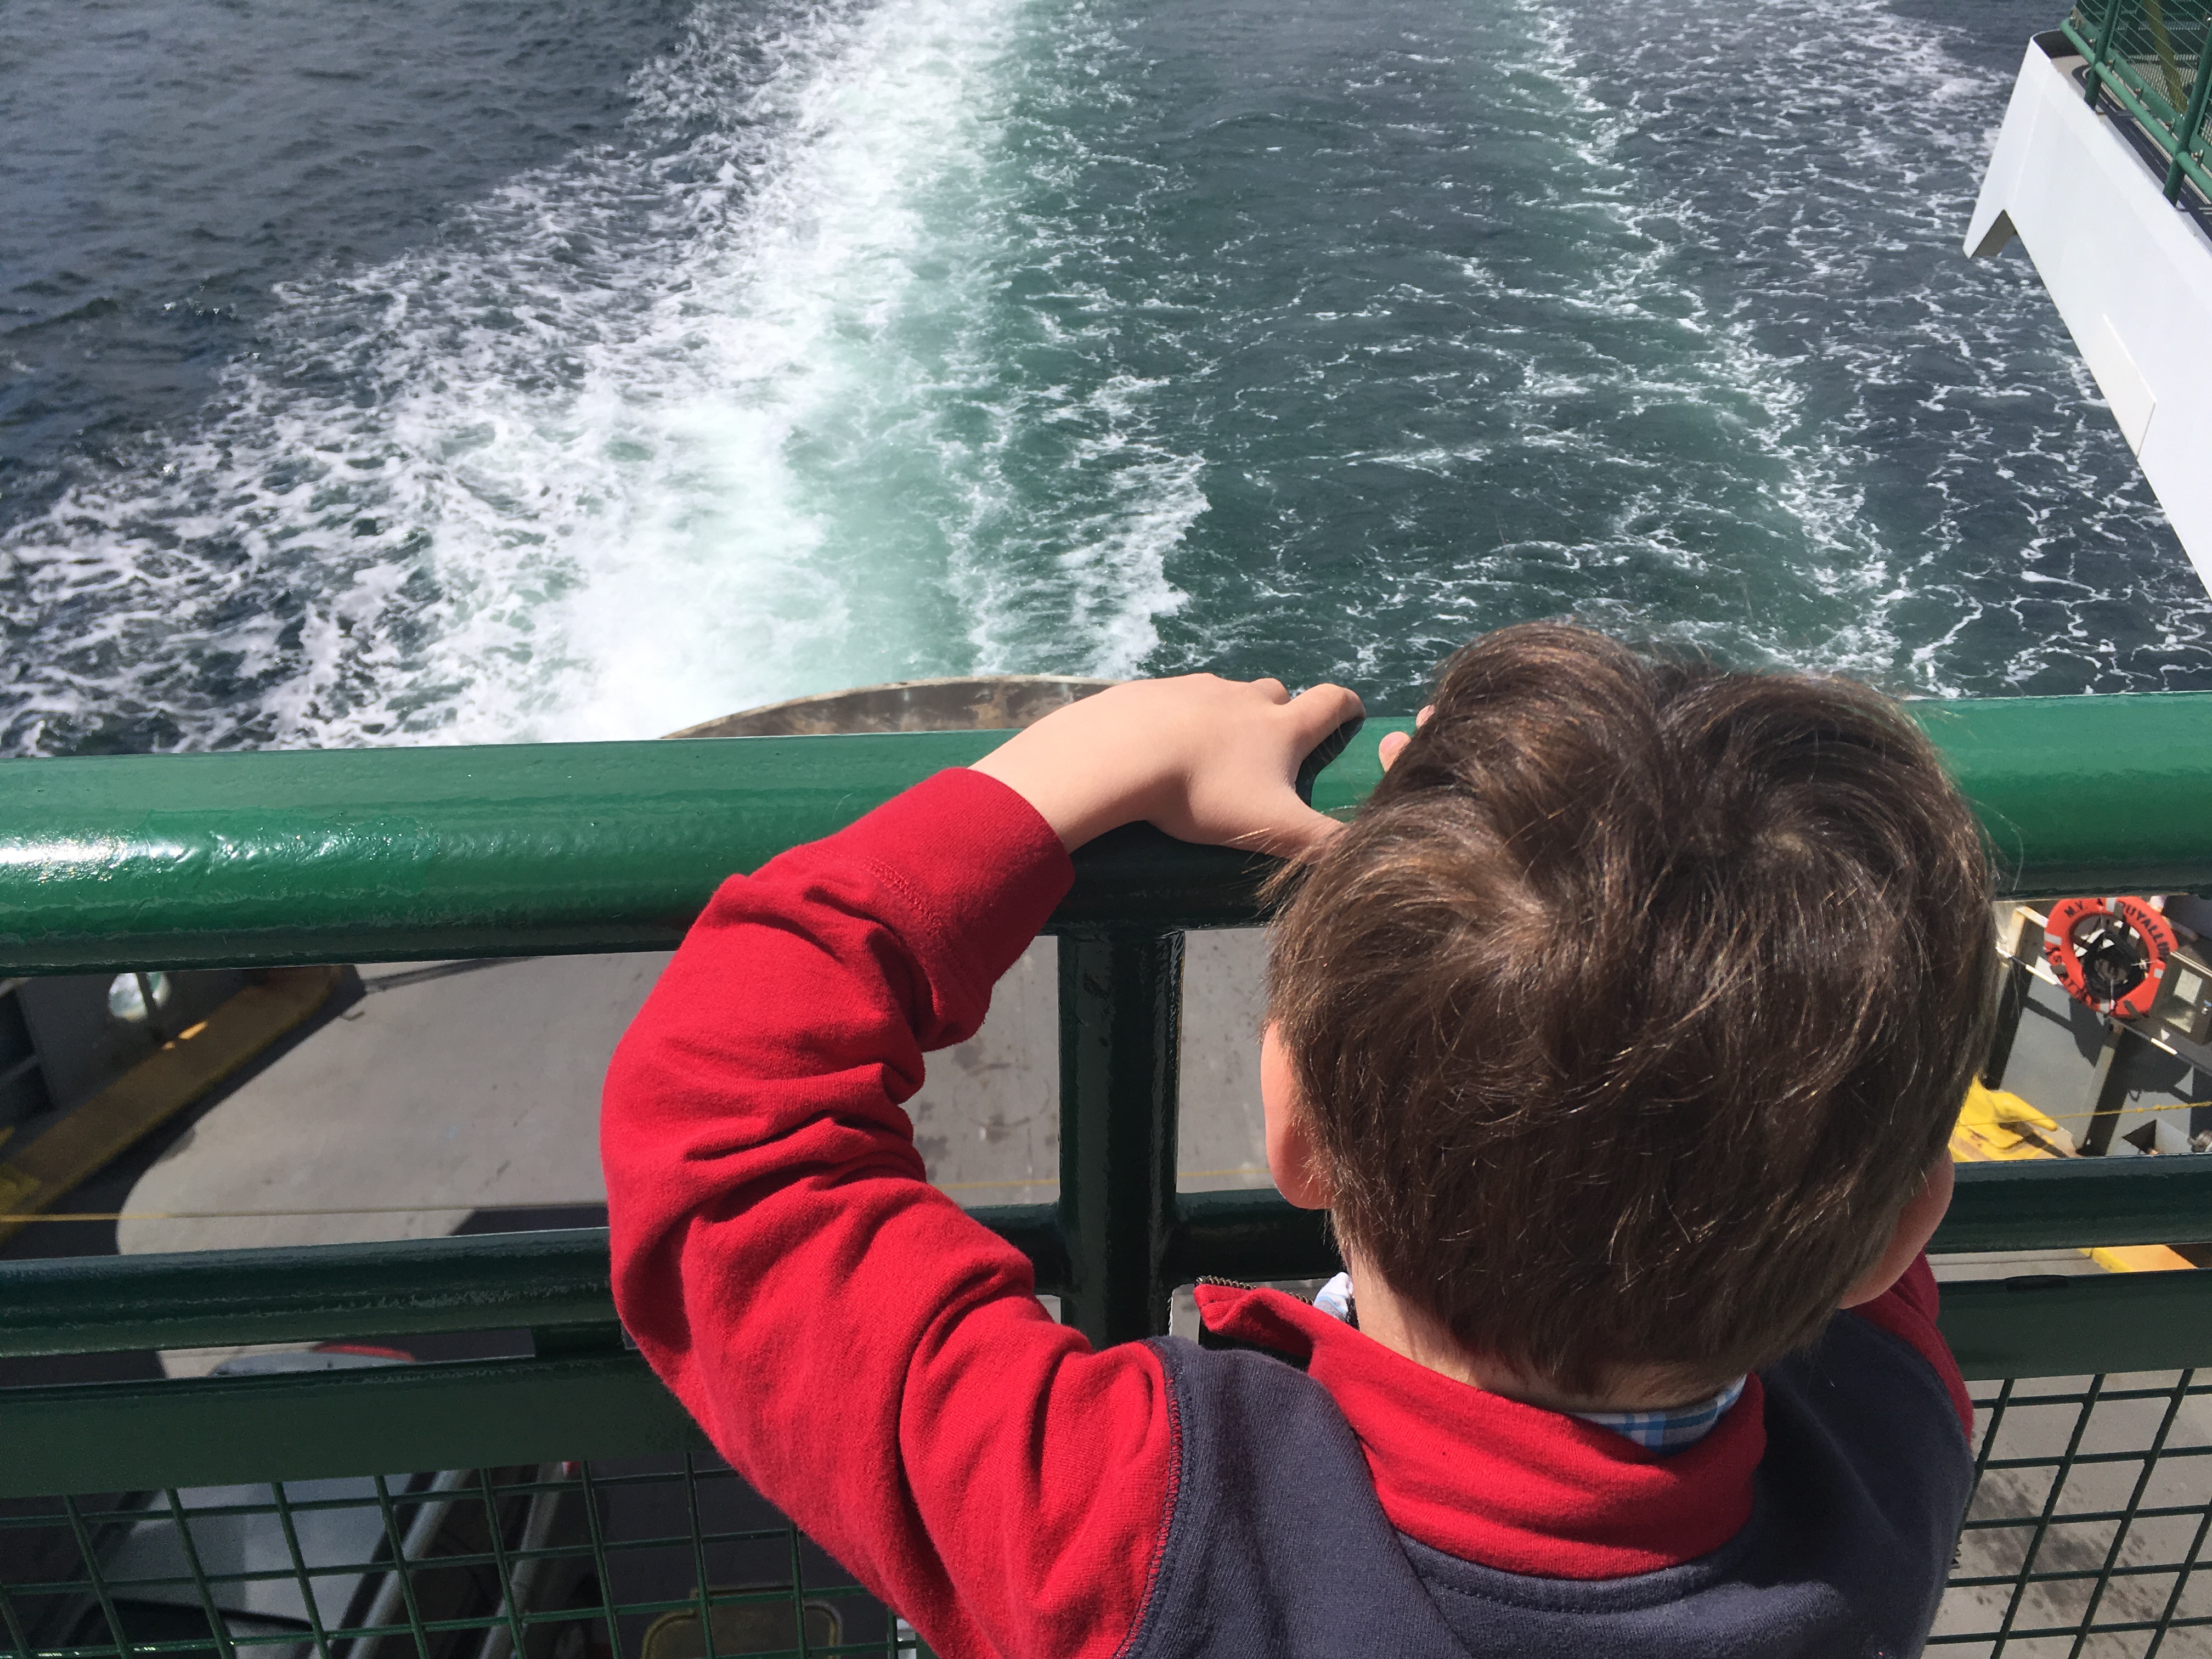 On the WA State ferry